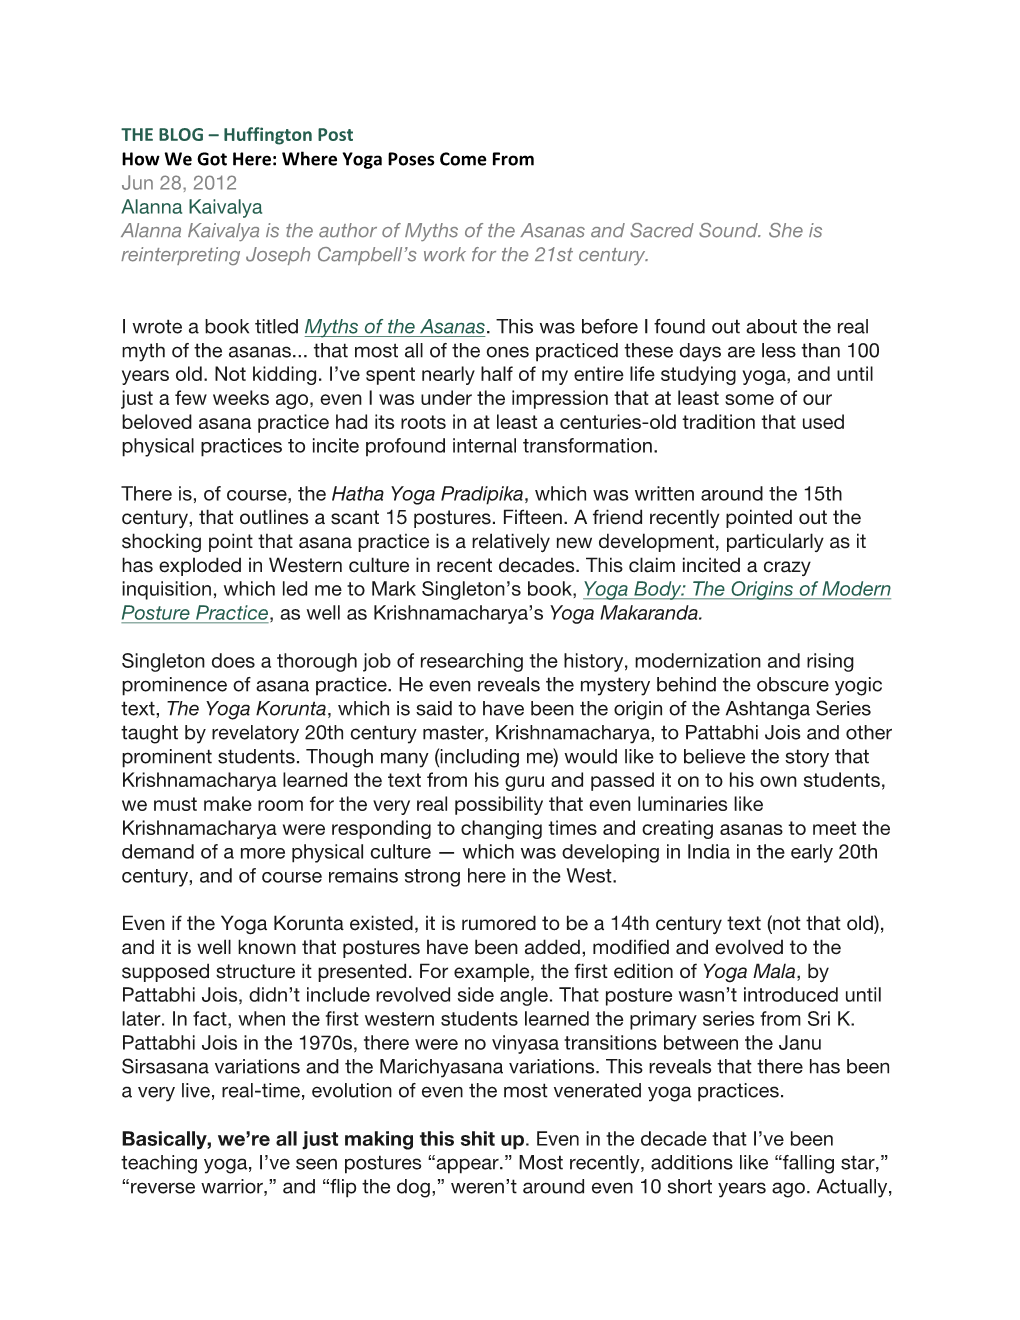 Huffington$Post$ How$We$Got$Here:$Where$Yoga$Poses$Come$From$ Jun 28, 2012 Alanna Kaivalya Alanna Kaivalya Is the Author of Myths of the Asanas and Sacred Sound